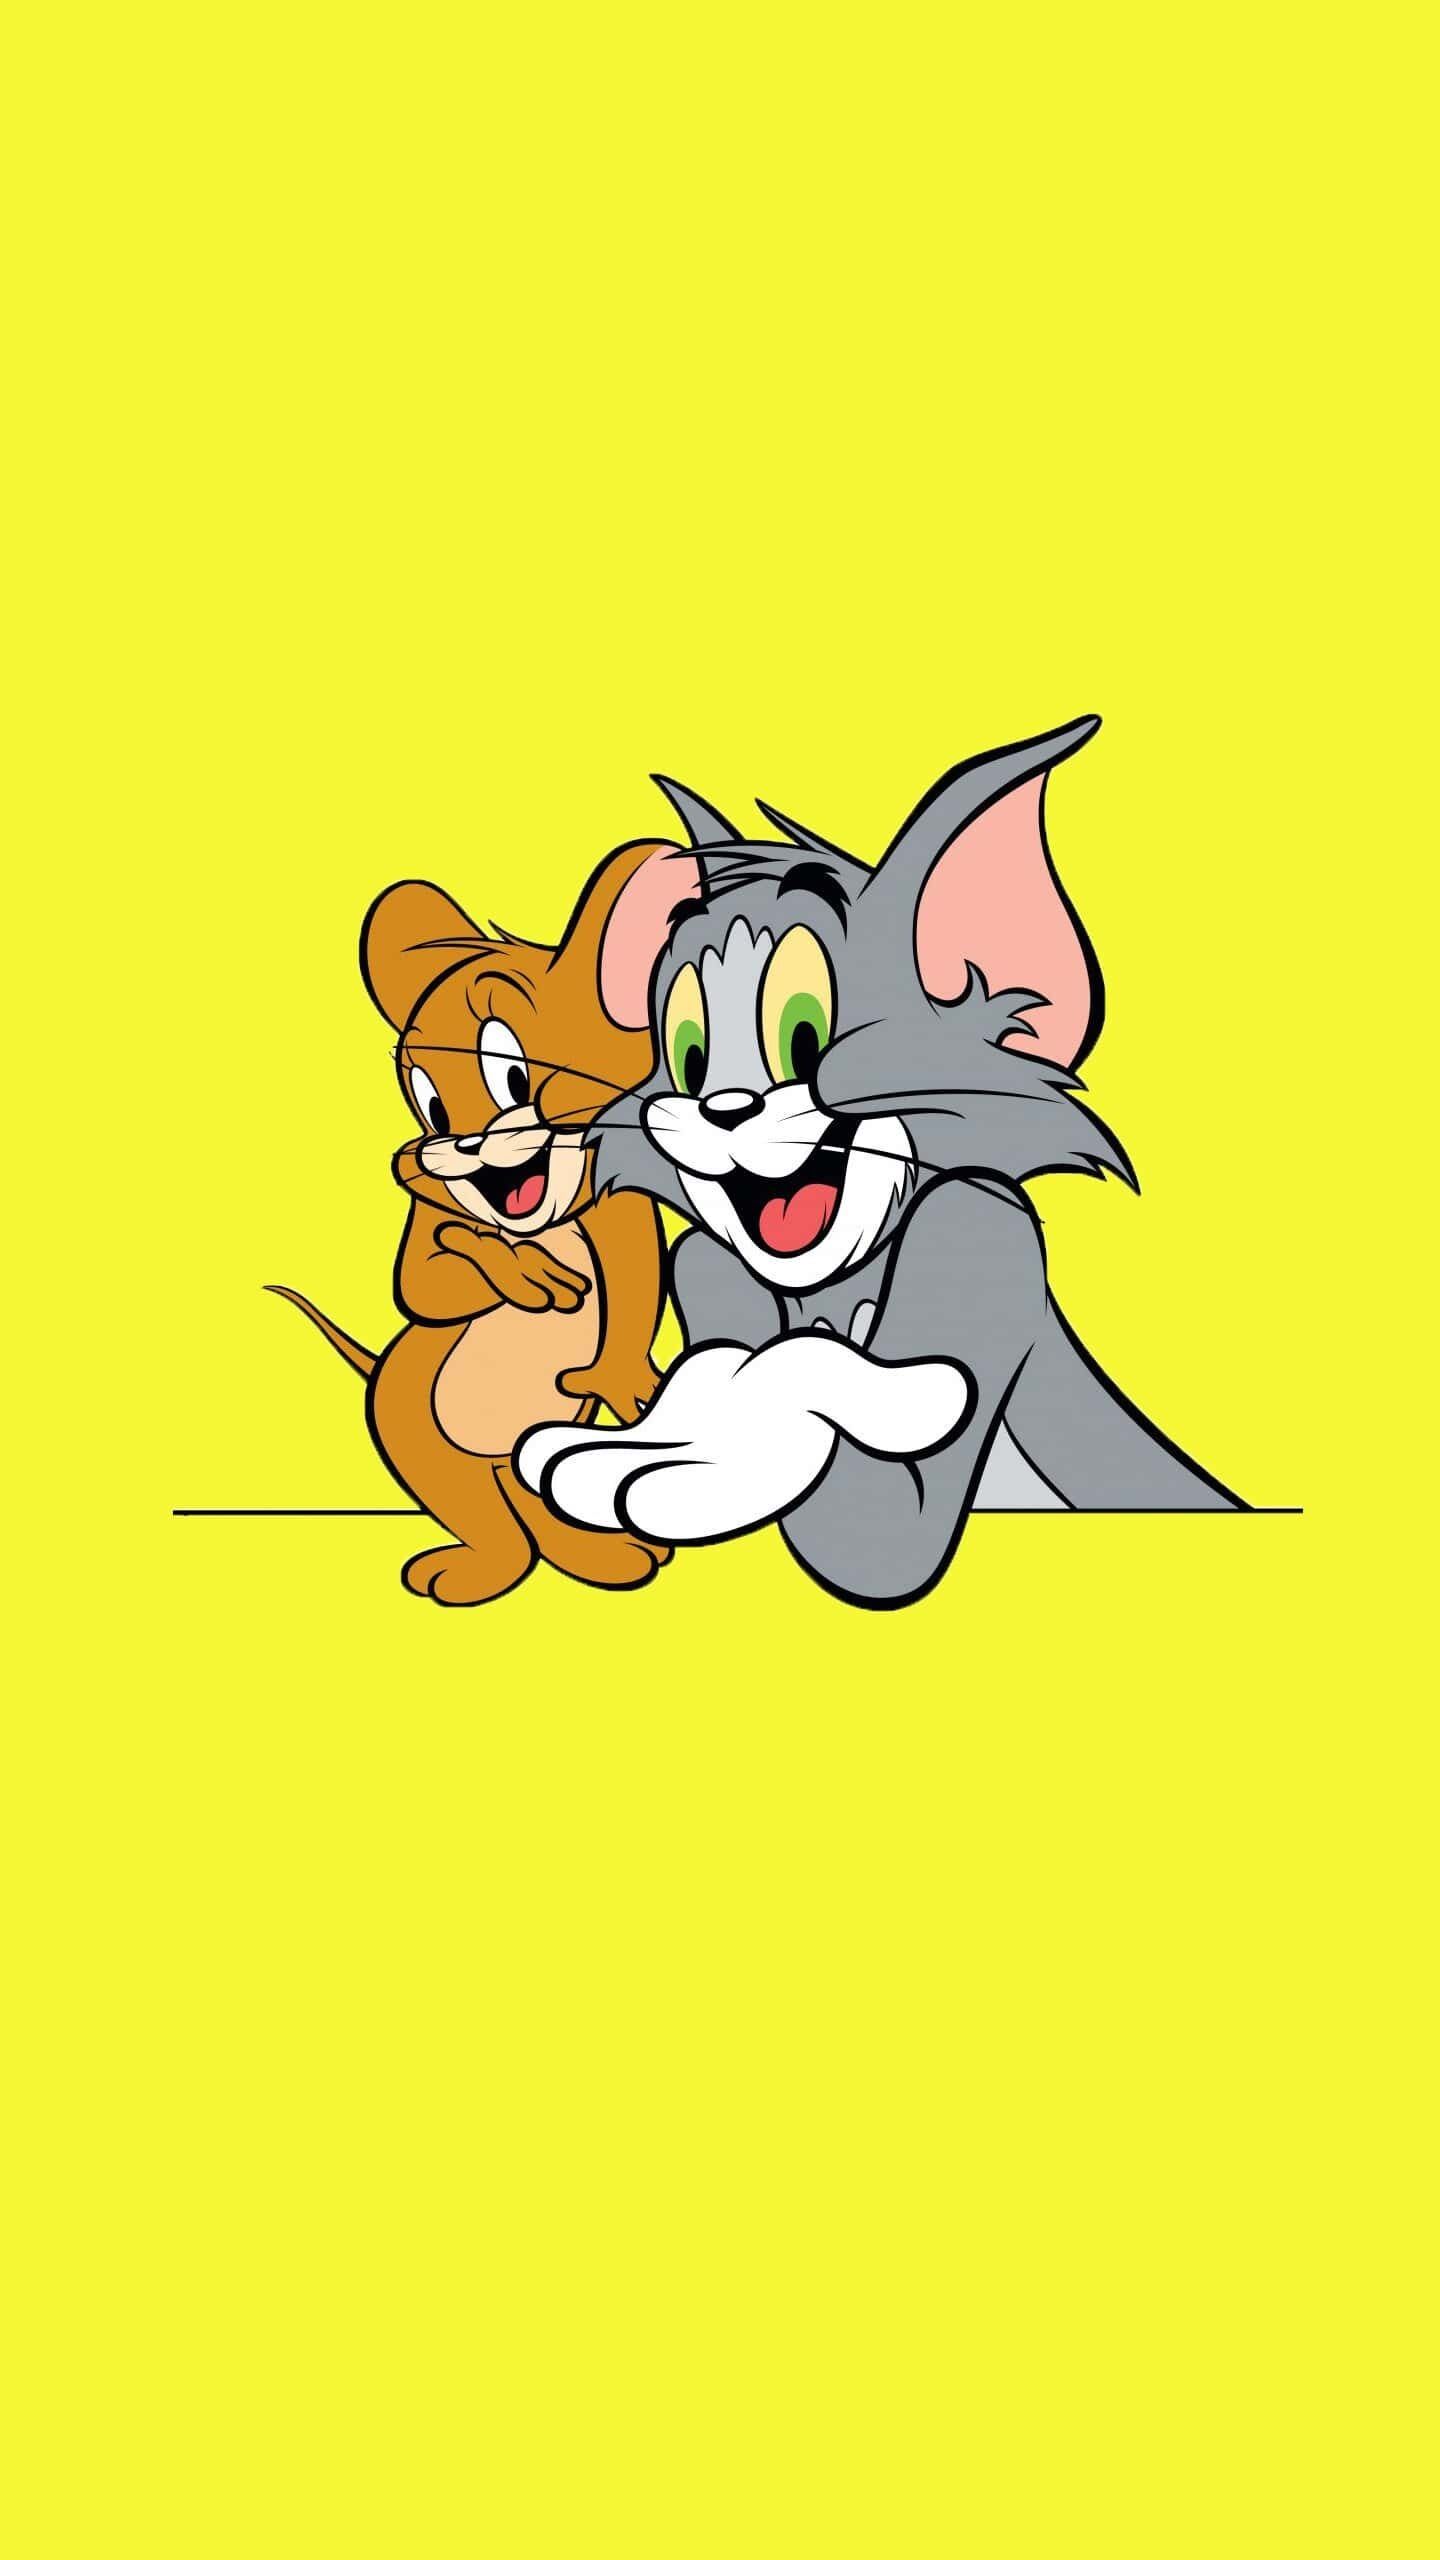 Tom and jerry wallpaper - Tom and Jerry